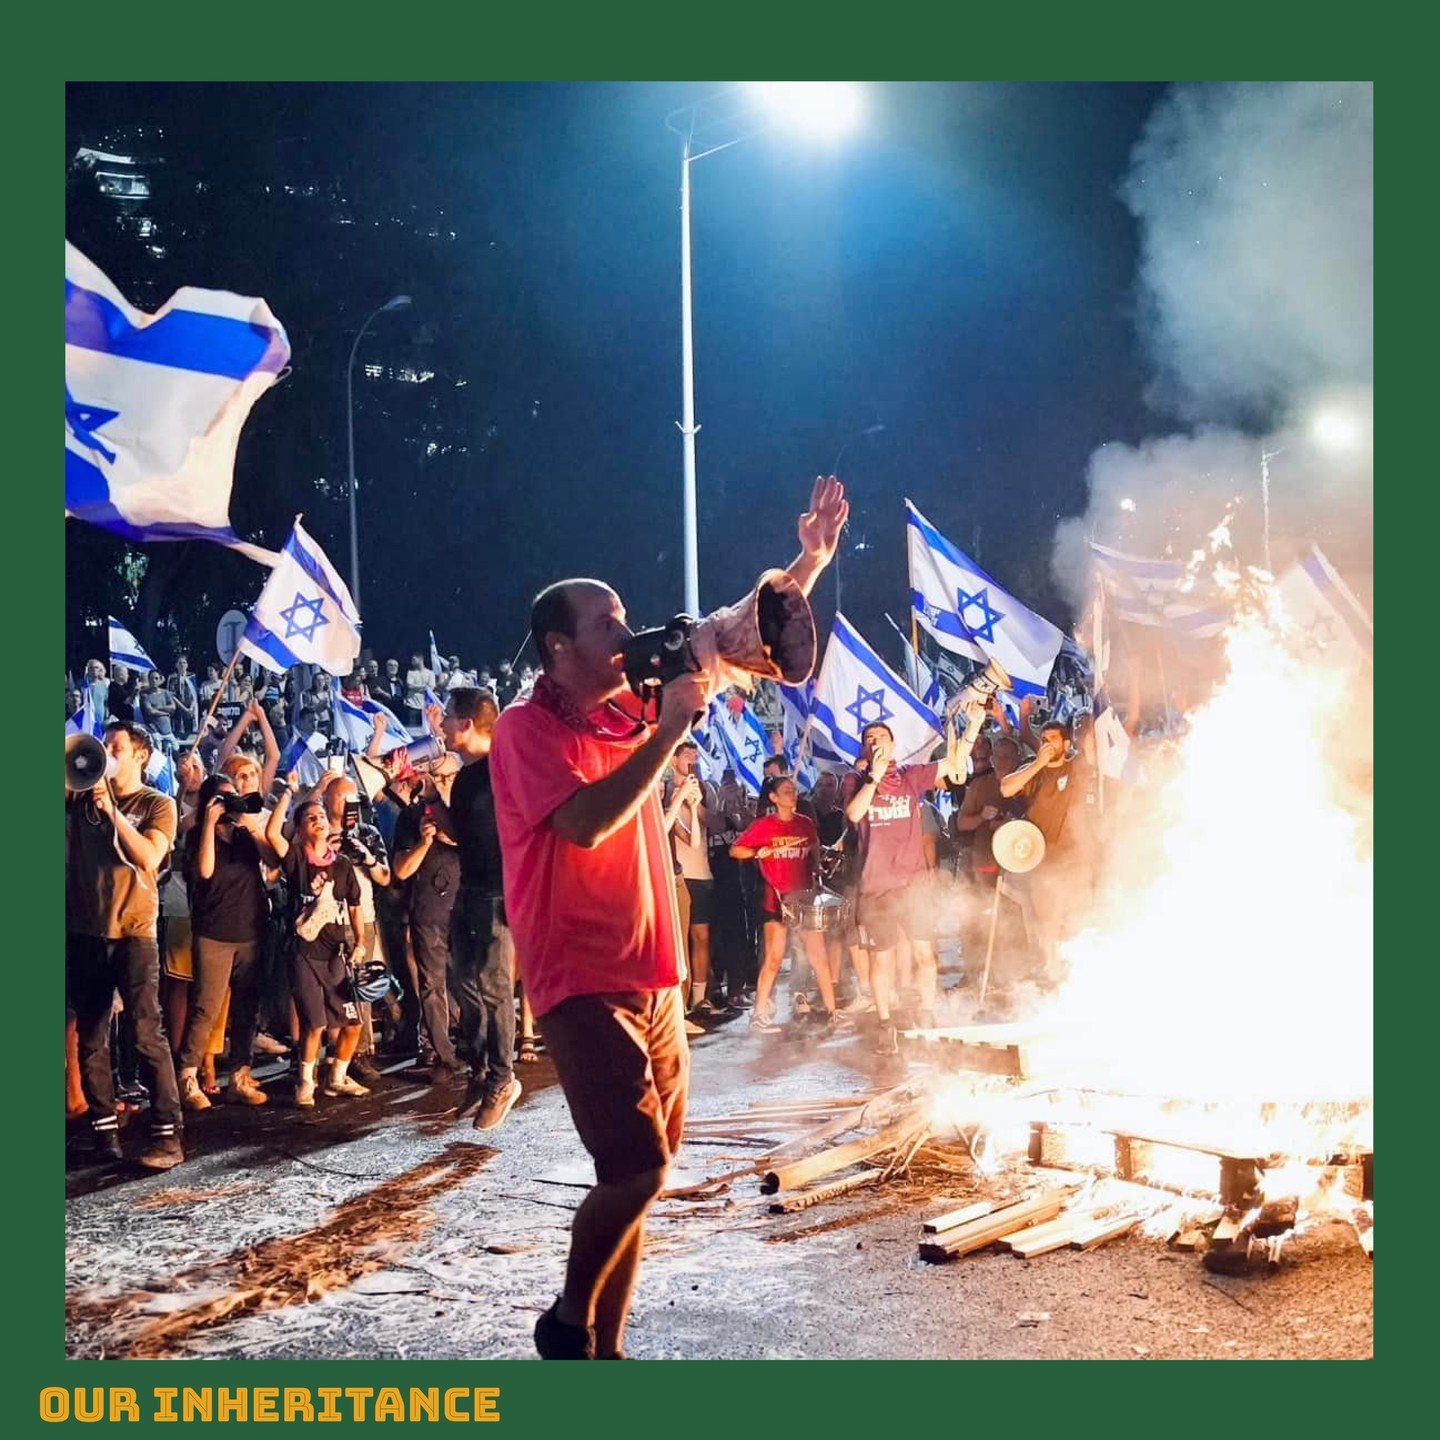 Learn how civilians can save their democracies.

Our student Maya Gayer is organizing and moderating a webinar, &ldquo;Fighting for Democracy: Lessons from a Protest Movement.&rdquo; The past year has been unprecedentedly dramatic and tumultuous for 